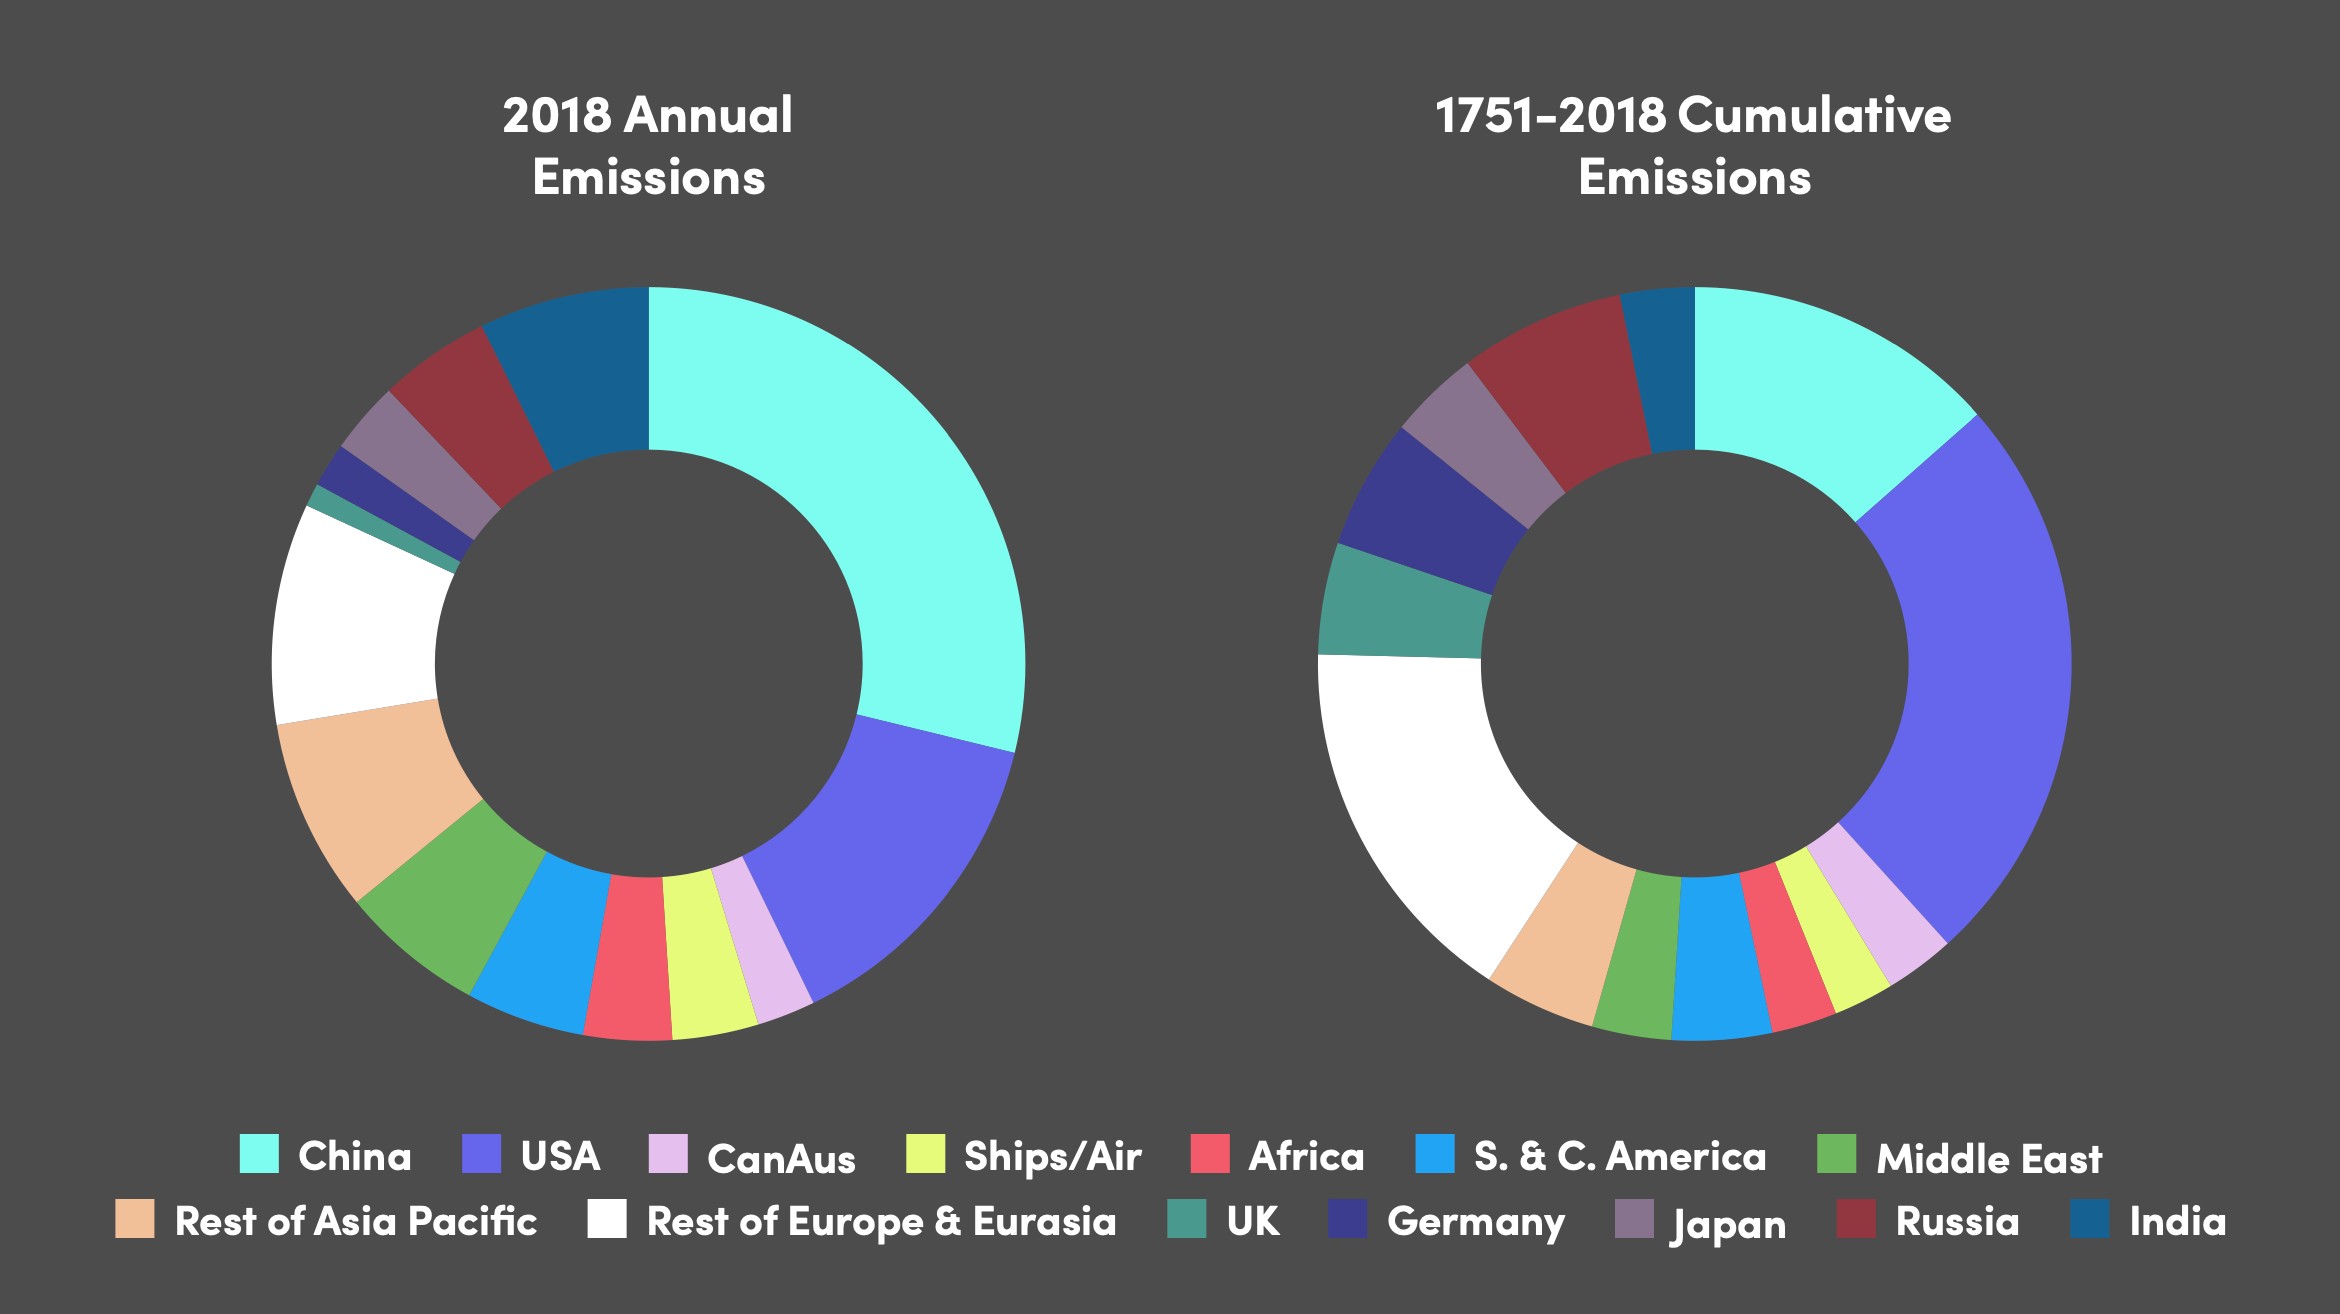 Estimated shares of carbon dioxide emissions from fossil fuels in 2018 compared with cumulative emissions over time, based on data released by BP.